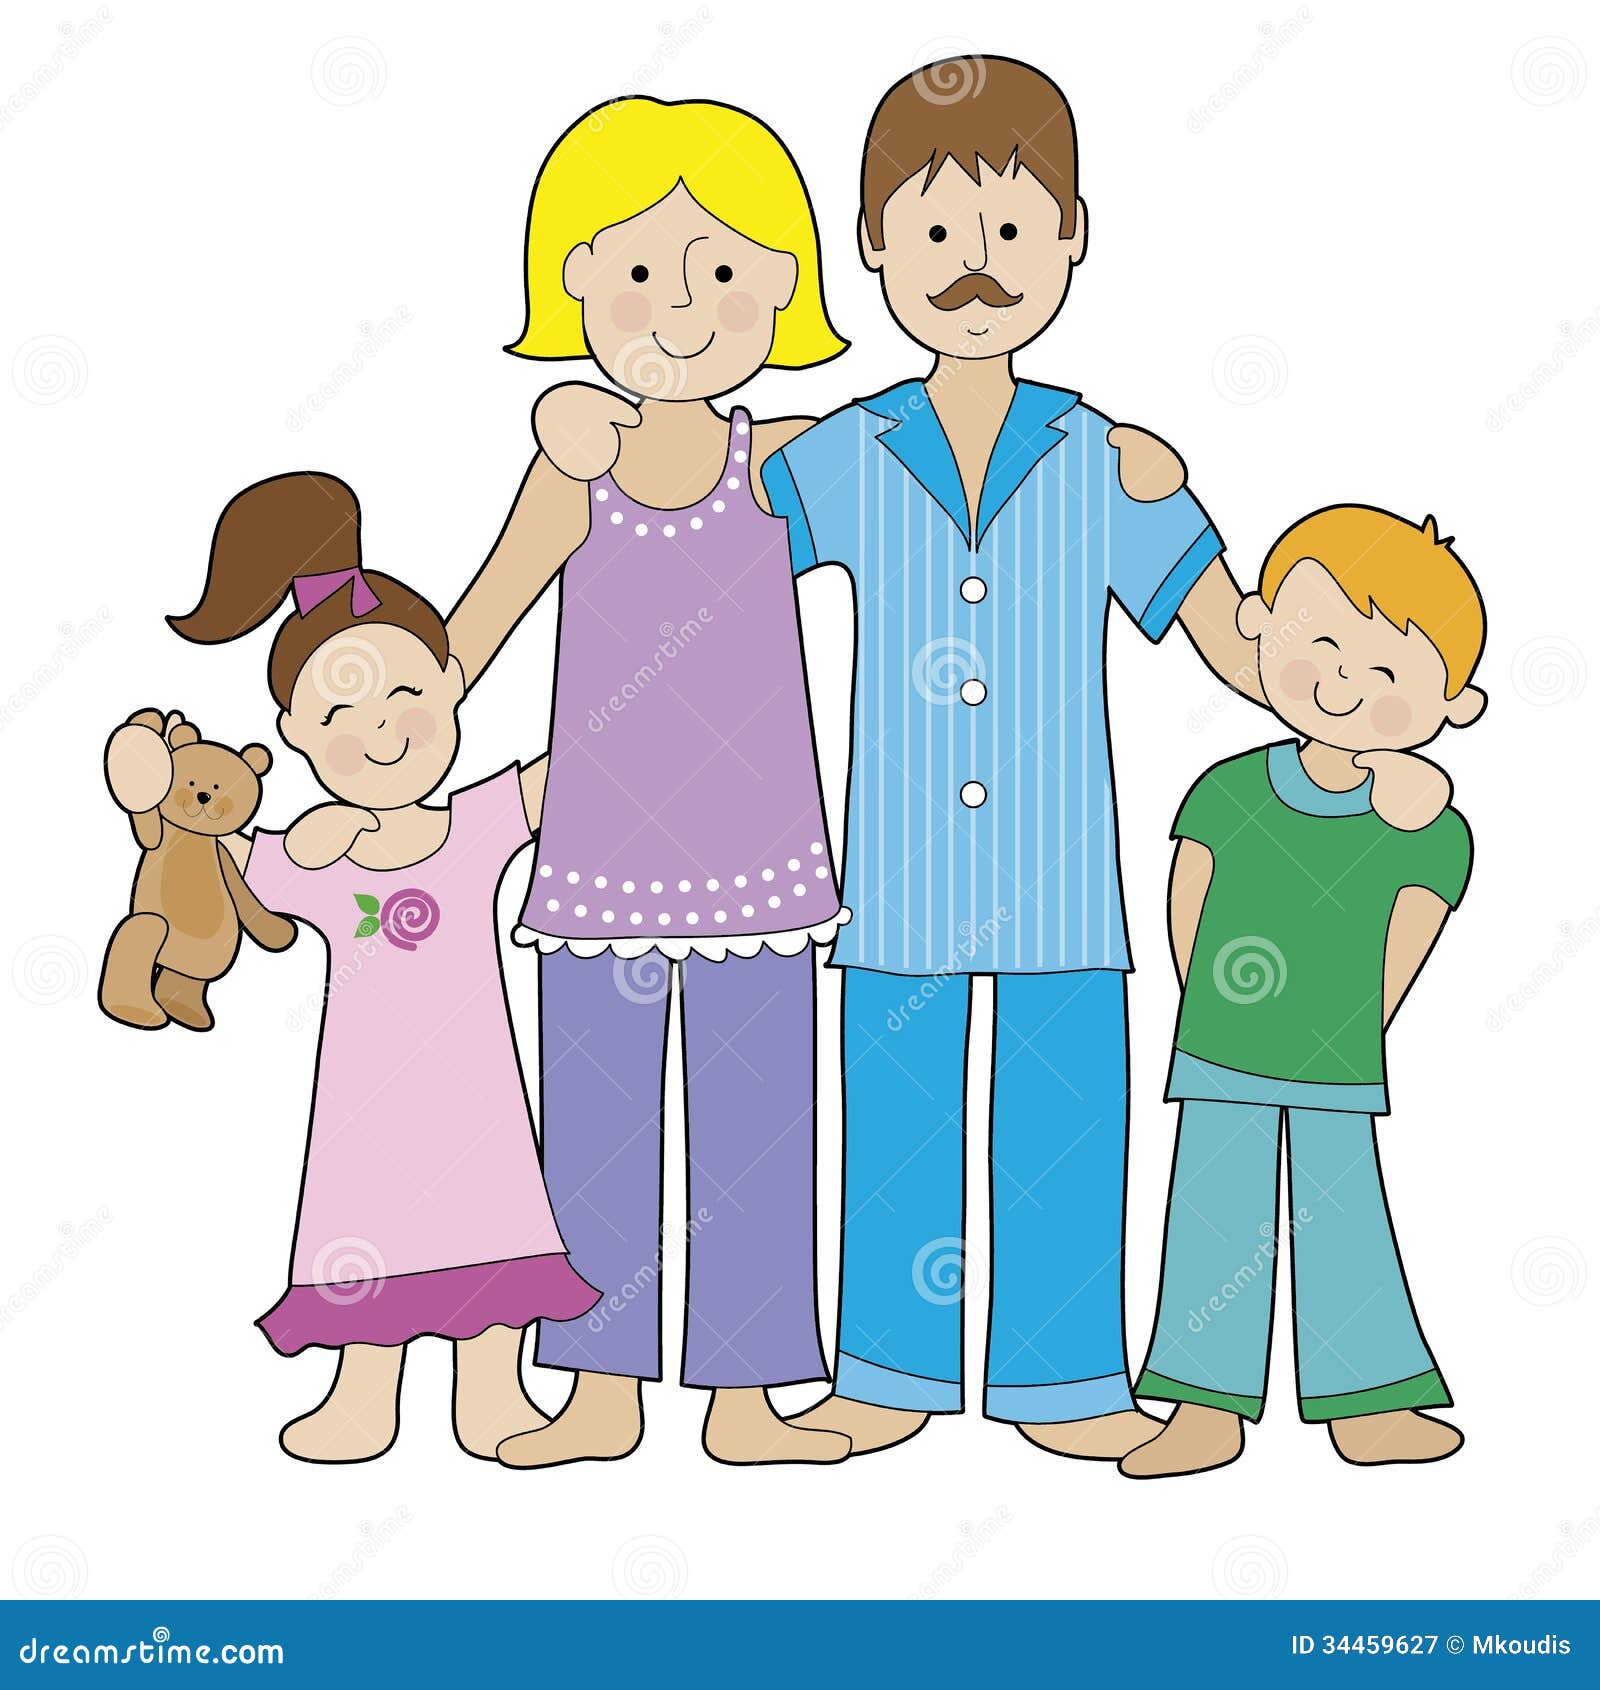 mom and dad clipart - photo #33